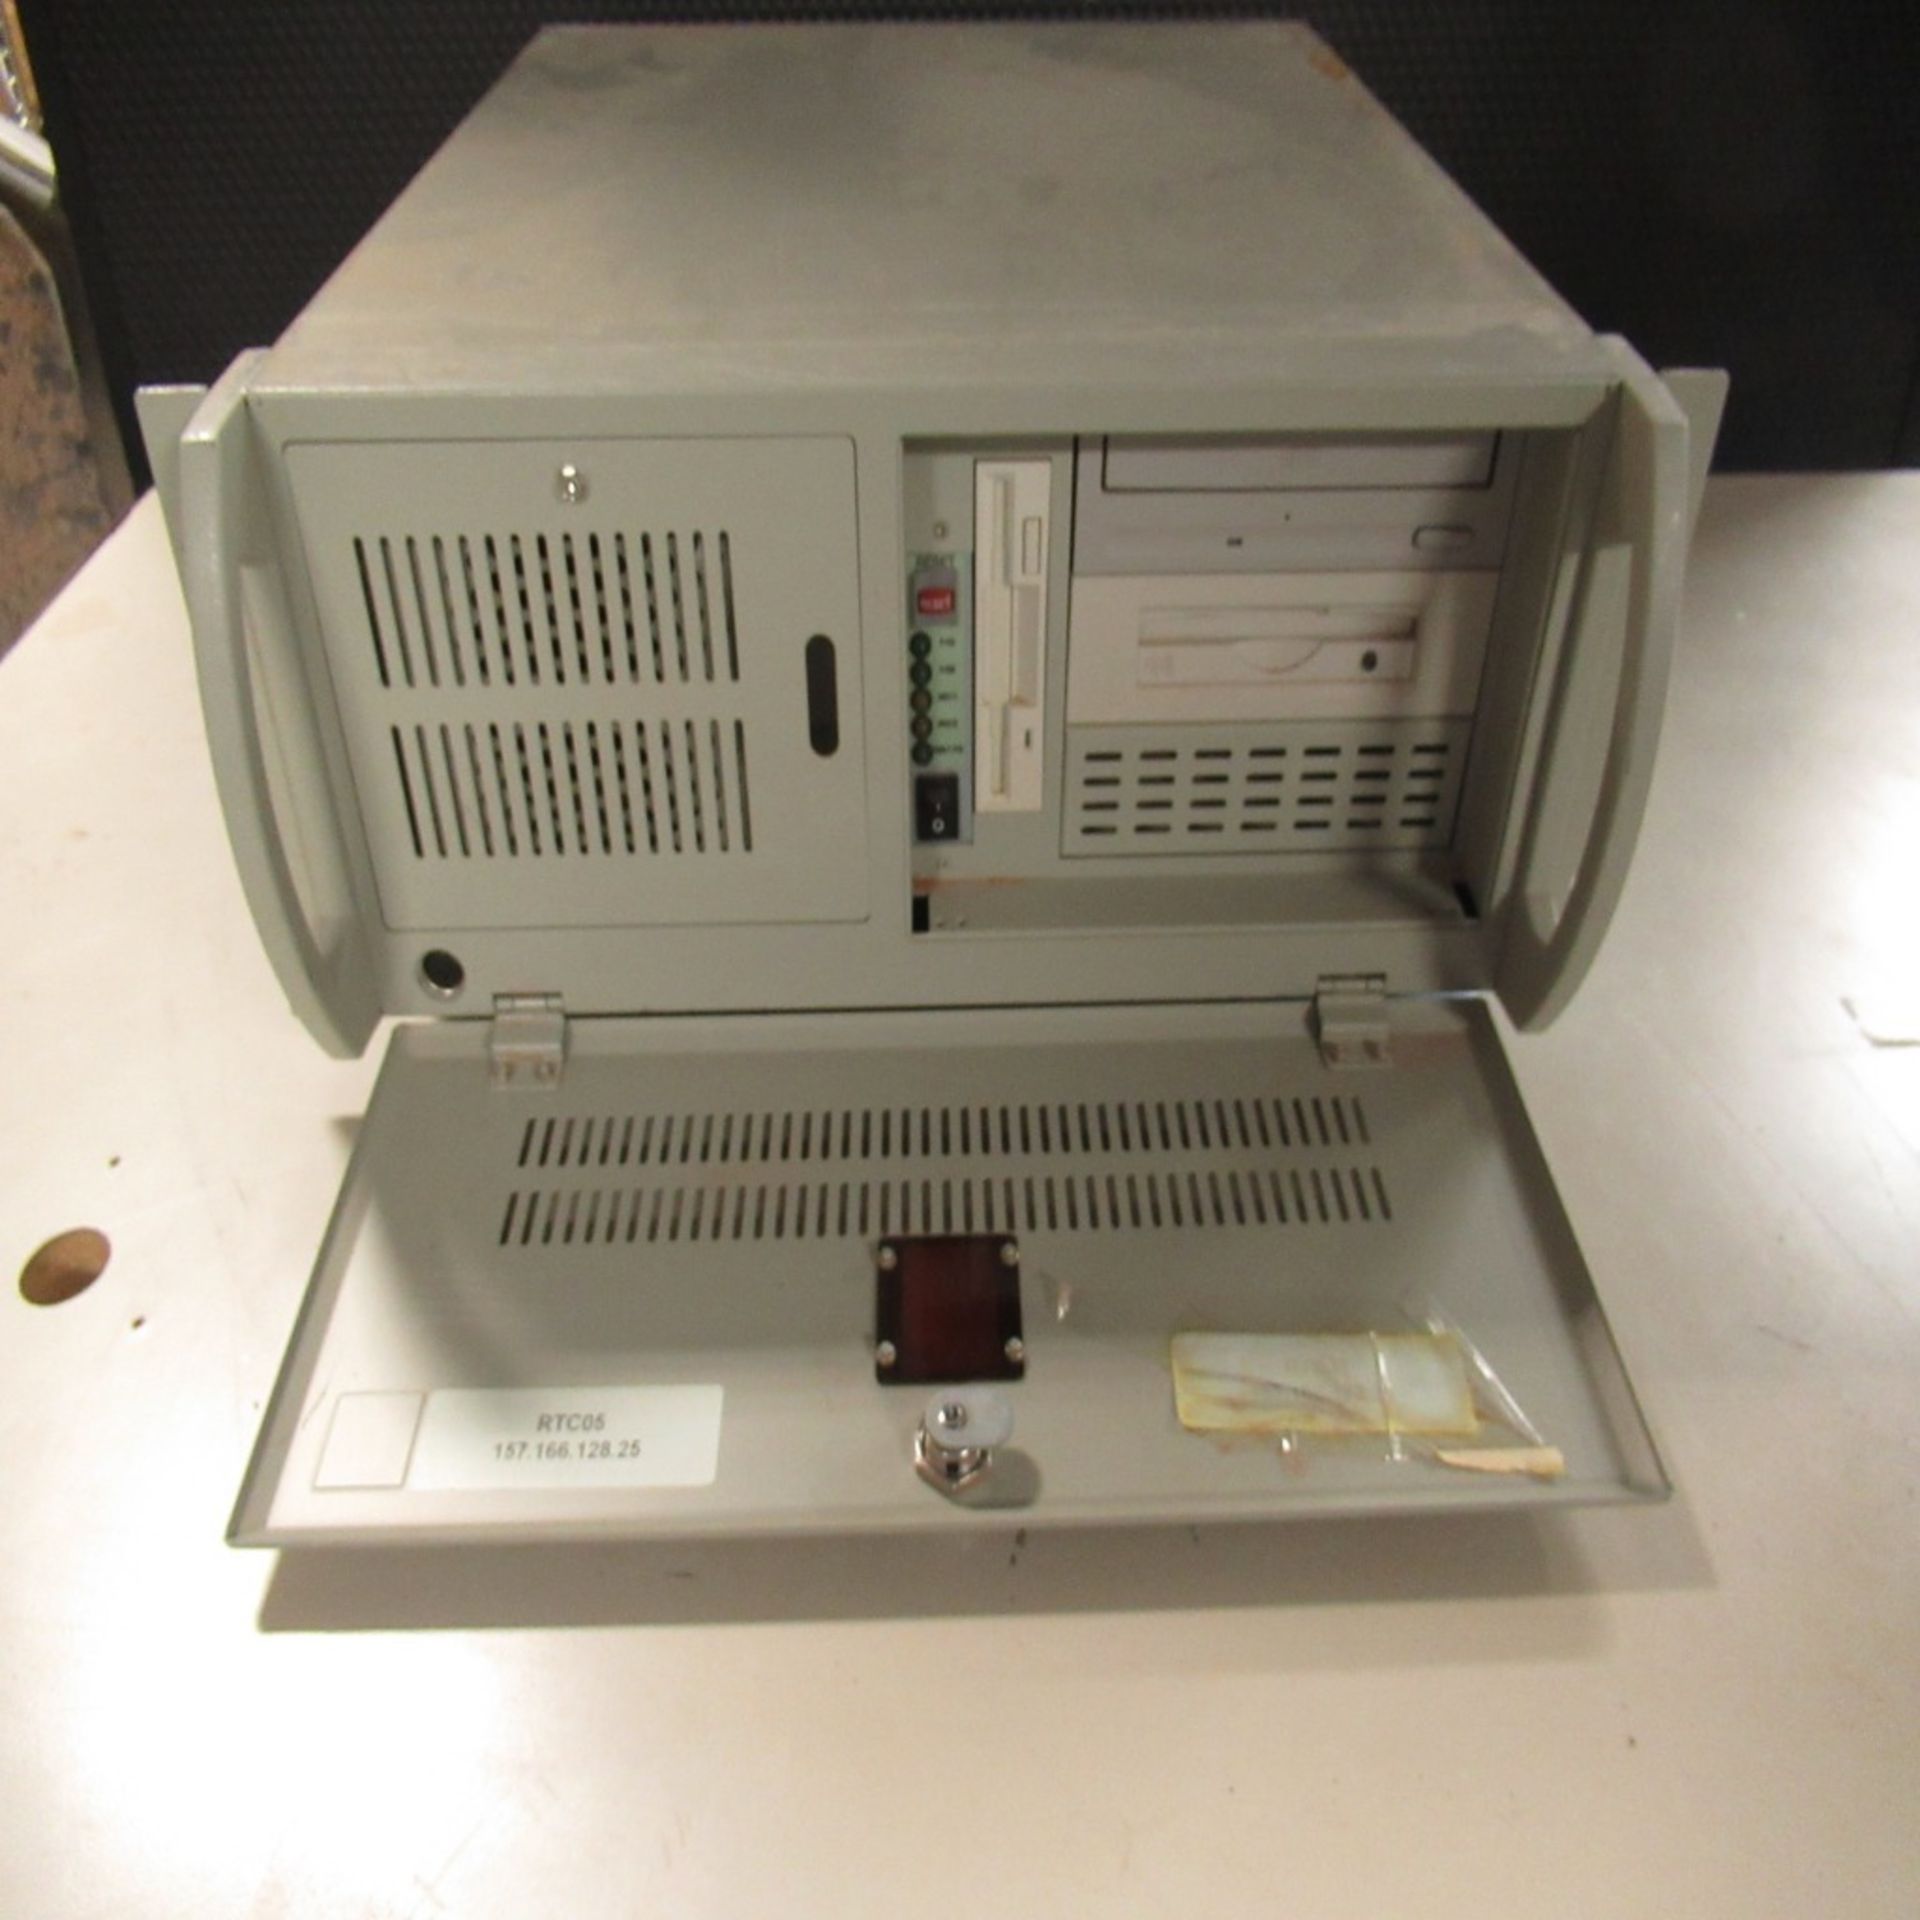 PHOTON SNAP SHOT MODEL 6000 *POWERS ON* NO SCREEN DISPLAY; FARNELL AP20-80 REGULATED POWER SUPPLY * - Image 87 of 222